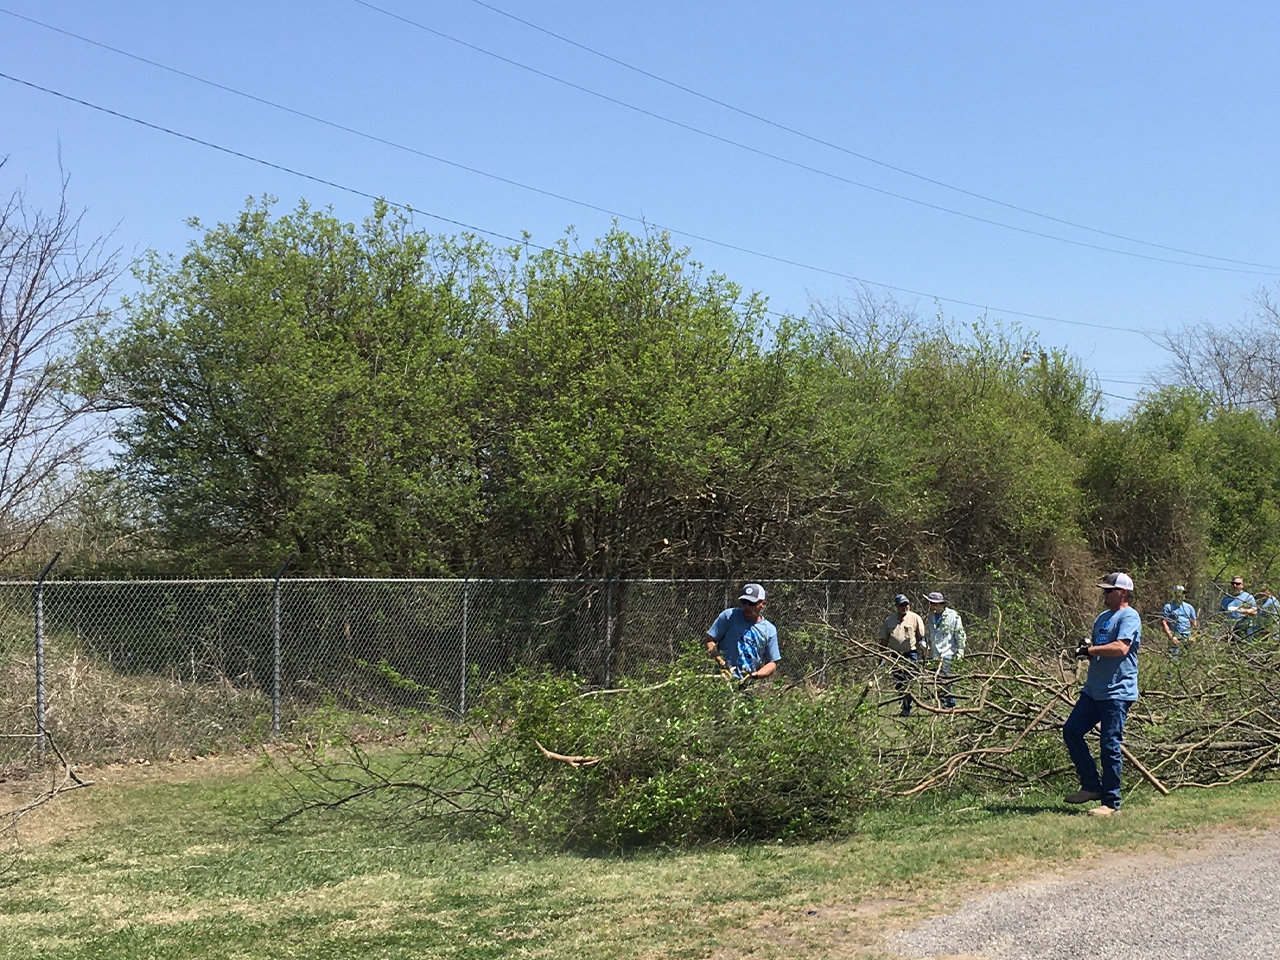 LCRA employees clear brush in Gonzales during LCRA’s Steps Forward Day on April 1. During the annual day of service, employees worked on more than 30 community projects throughout the LCRA service territory.